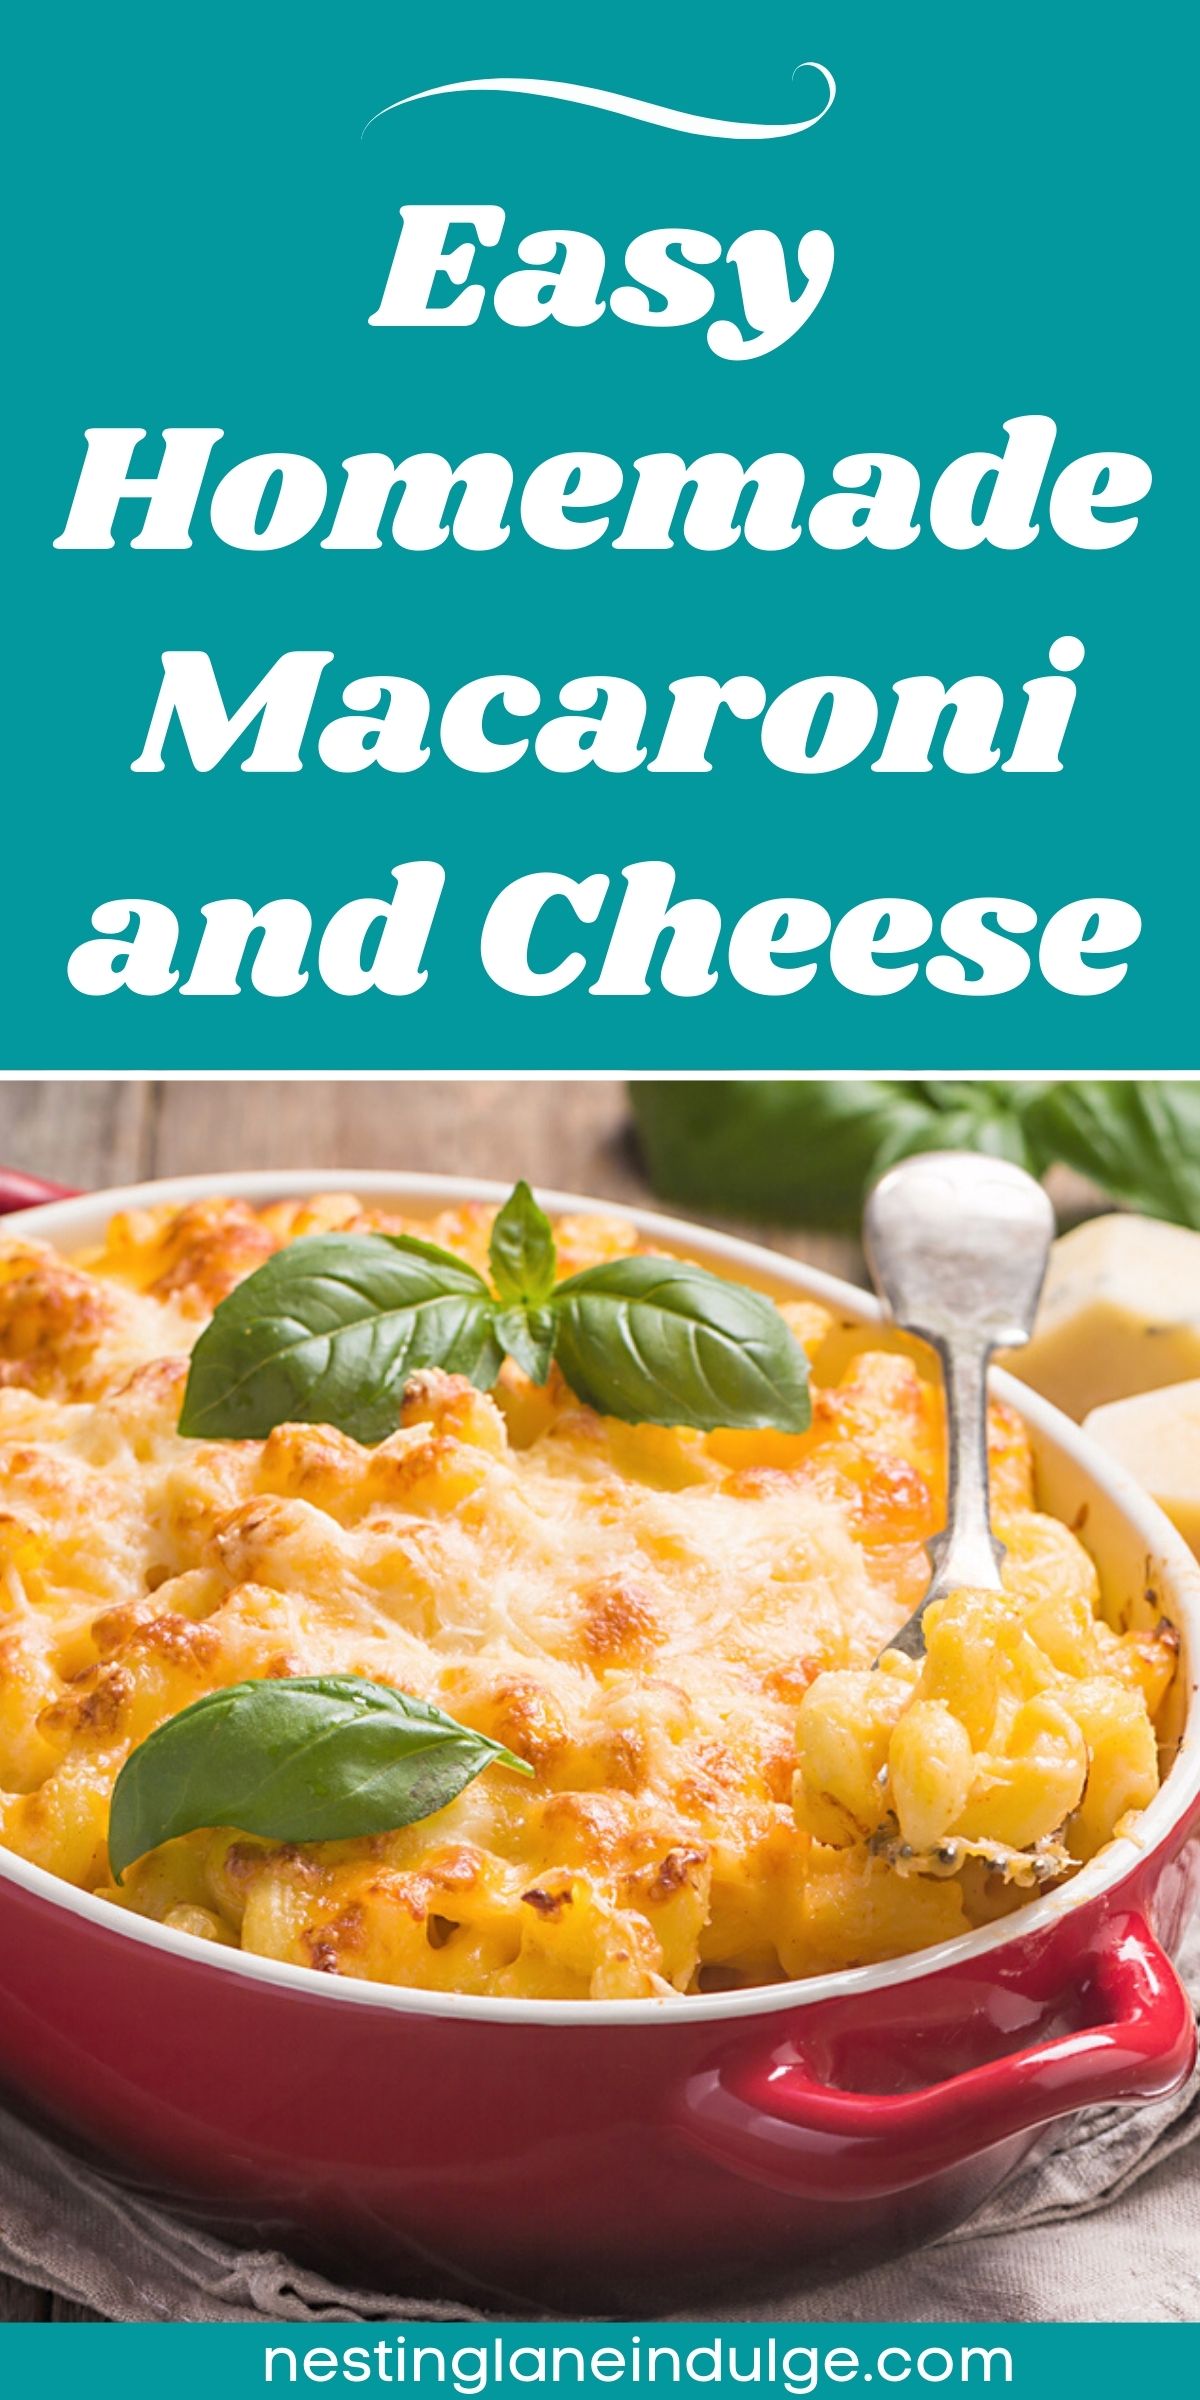 Graphic for Pinterest of Easy Homemade Macaroni and Cheese Recipe.